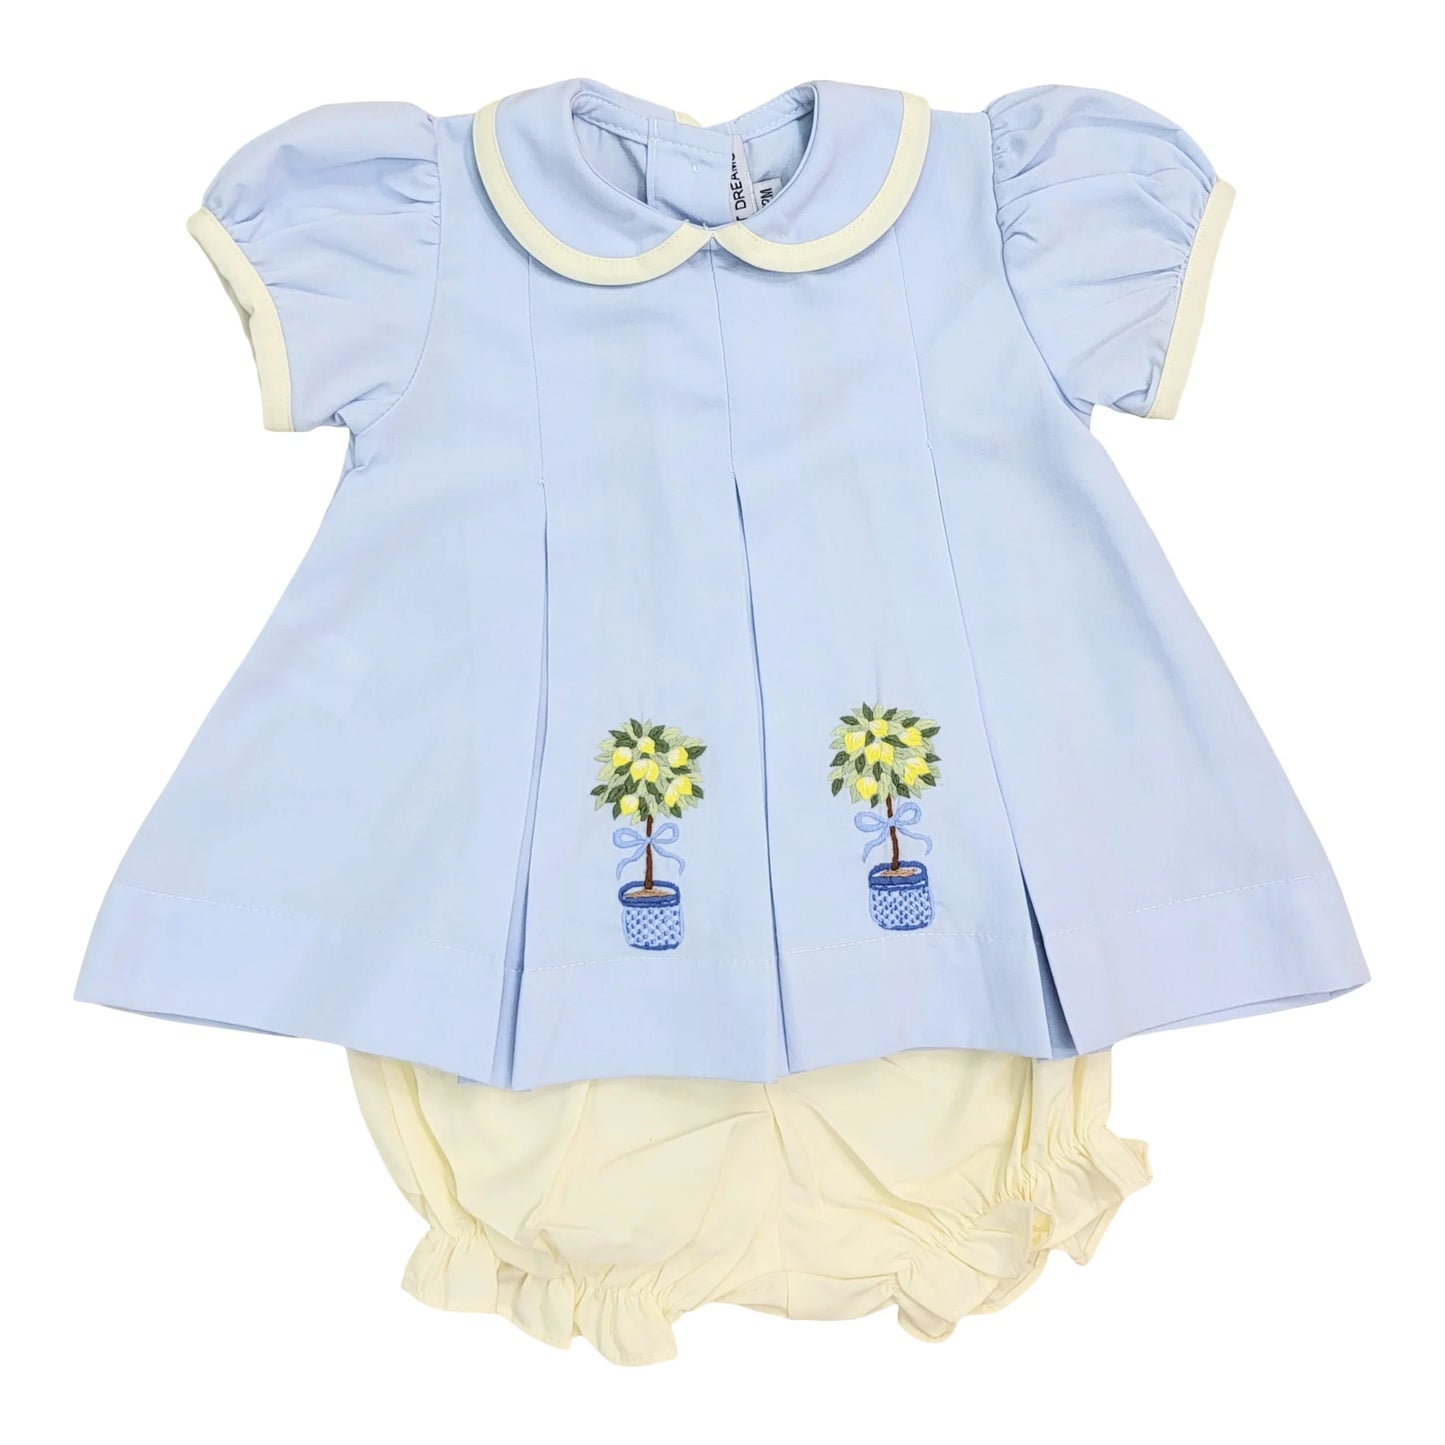 Lemon Tree Embroidered Outfit Set